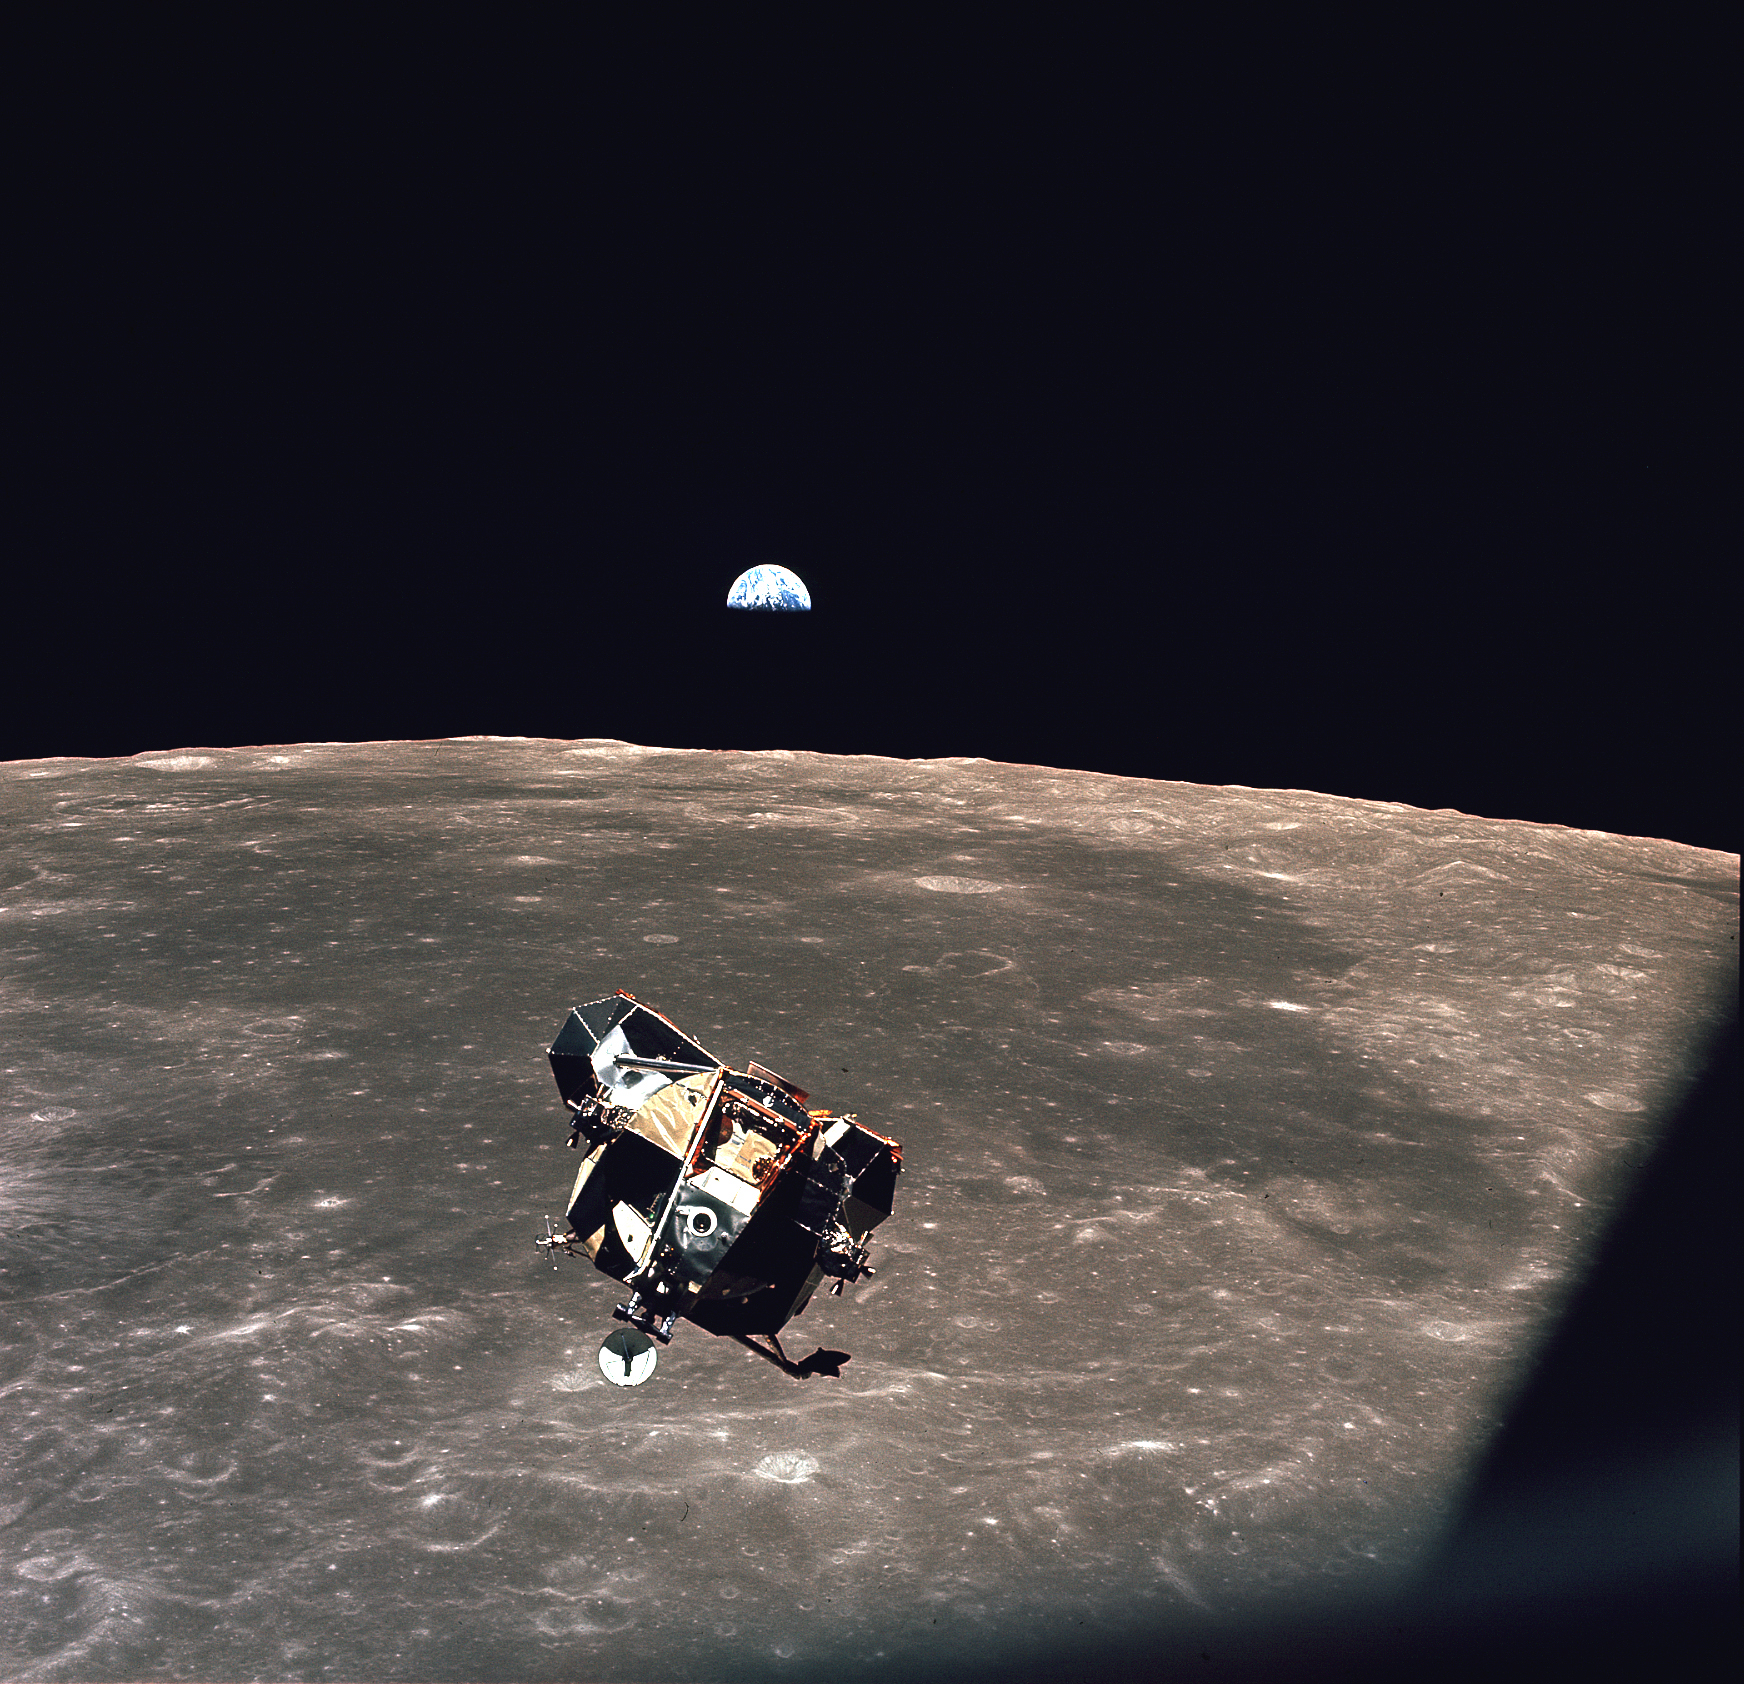 A view of the Apollo 11 lunar module "Eagle" as it returned from the surface of the moon to dock with the command module "Columbia".